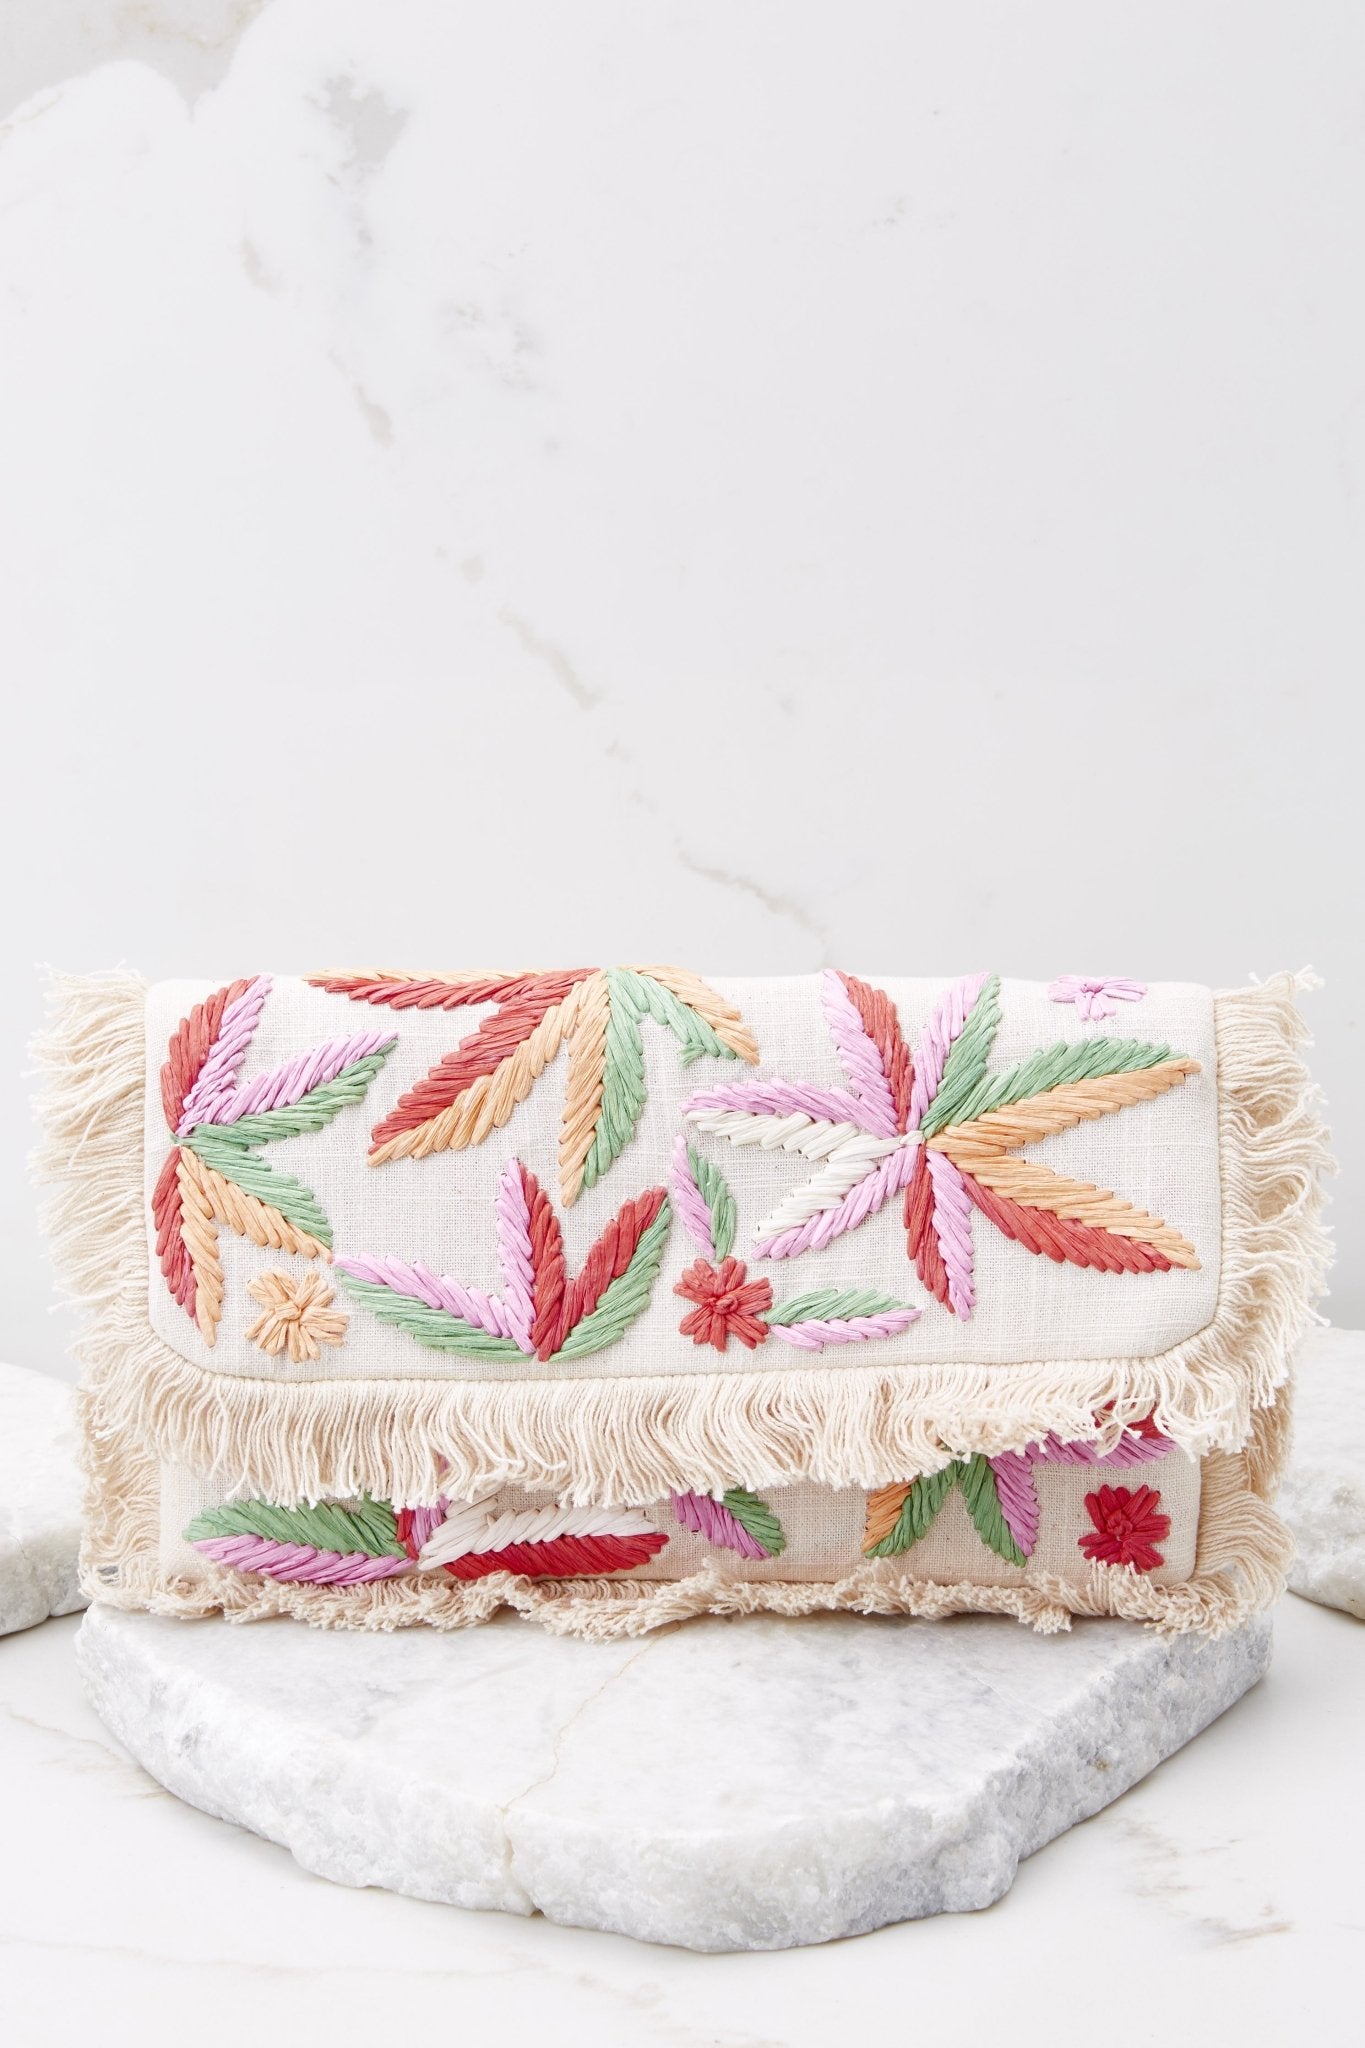 Into The Sun Floral Clutch - Red Dress